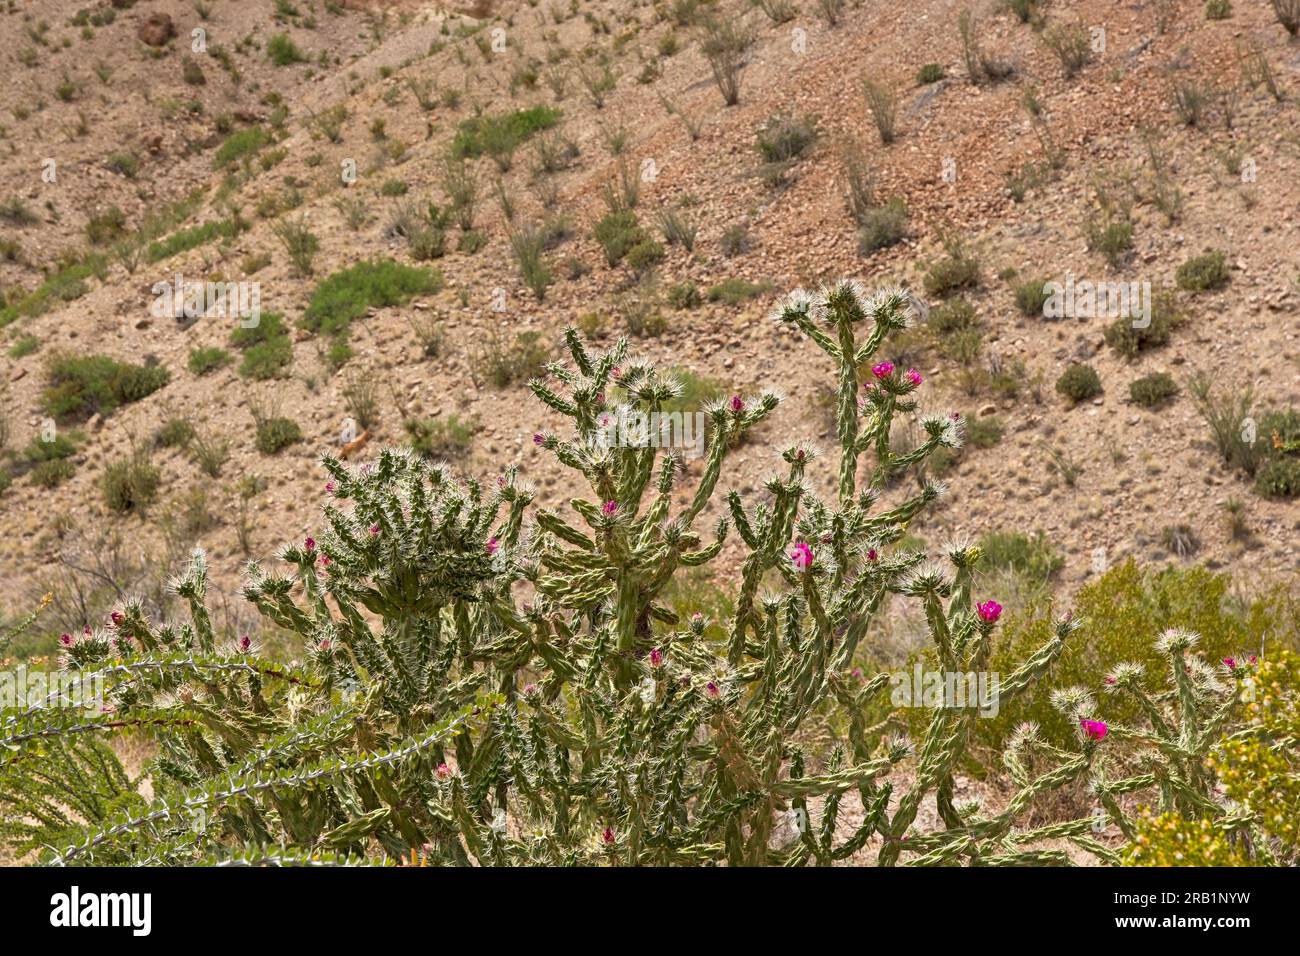 Close-up cane cholla cacti (Cylindropuntia imbricata) in bloom on Chihuahua desert hillside Stock Photo